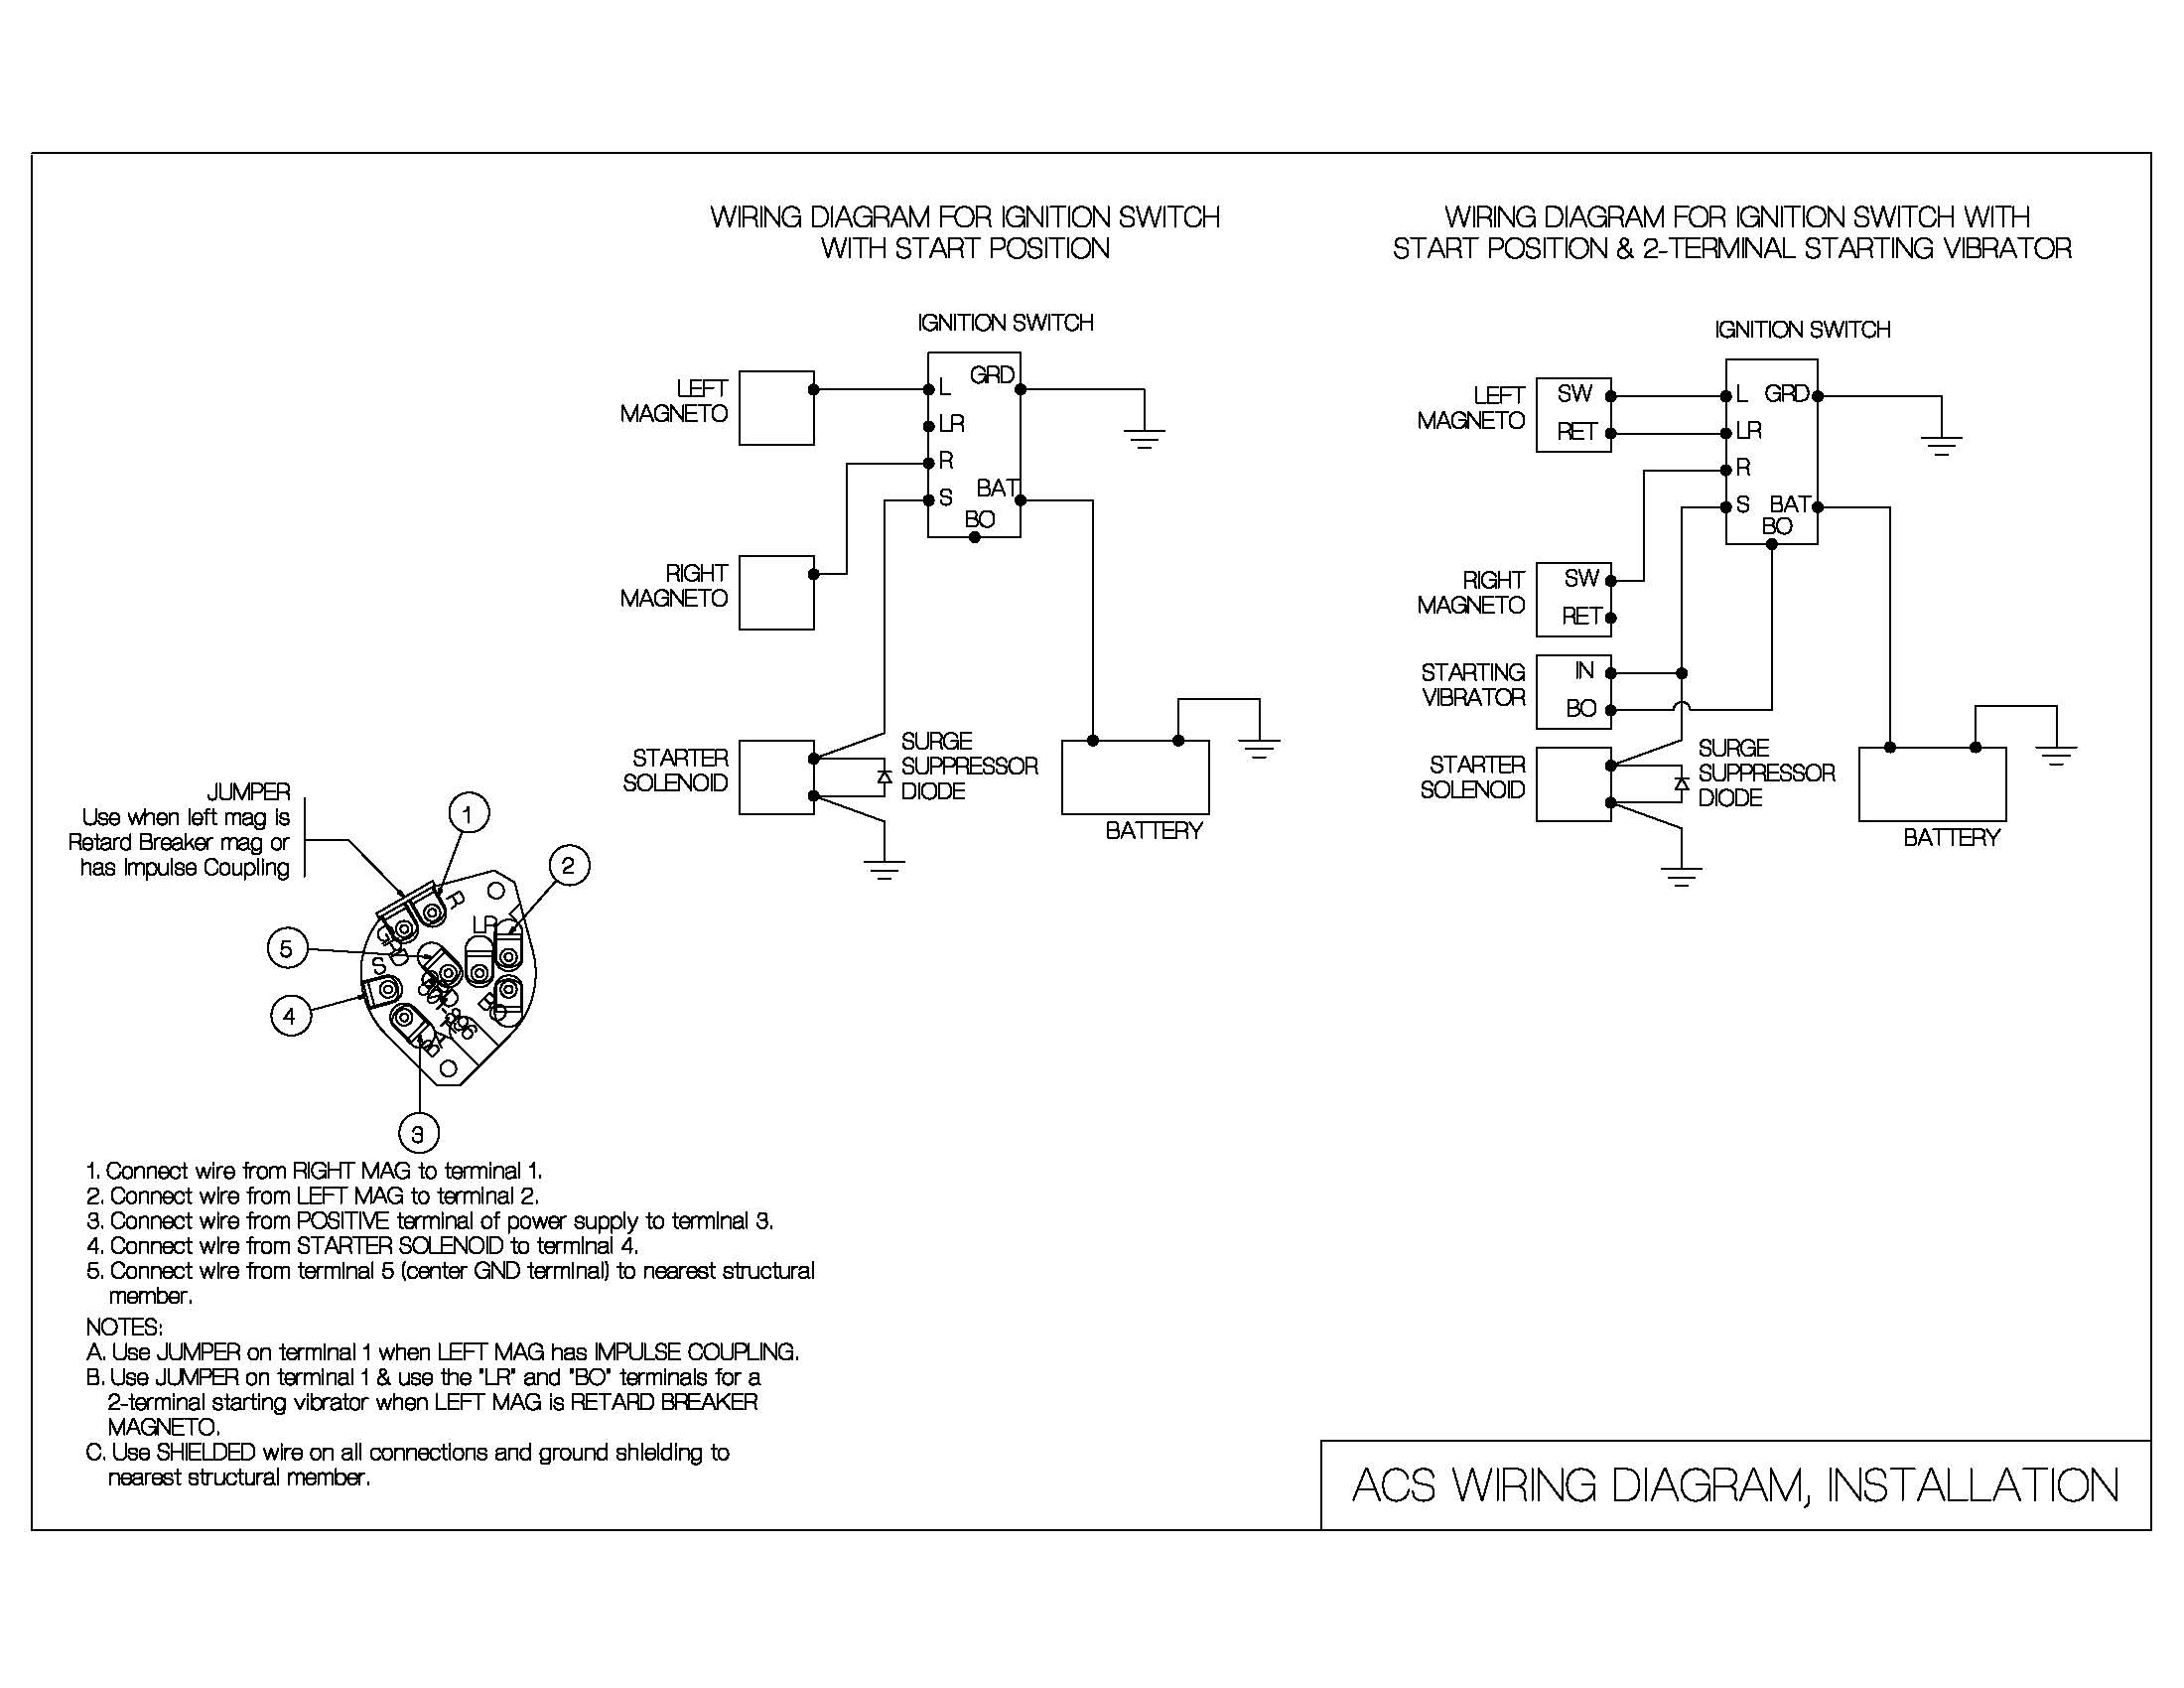 Wiring Diagram For Ignition Switch | Wiring Diagram - Ignition Switch Wiring Diagram